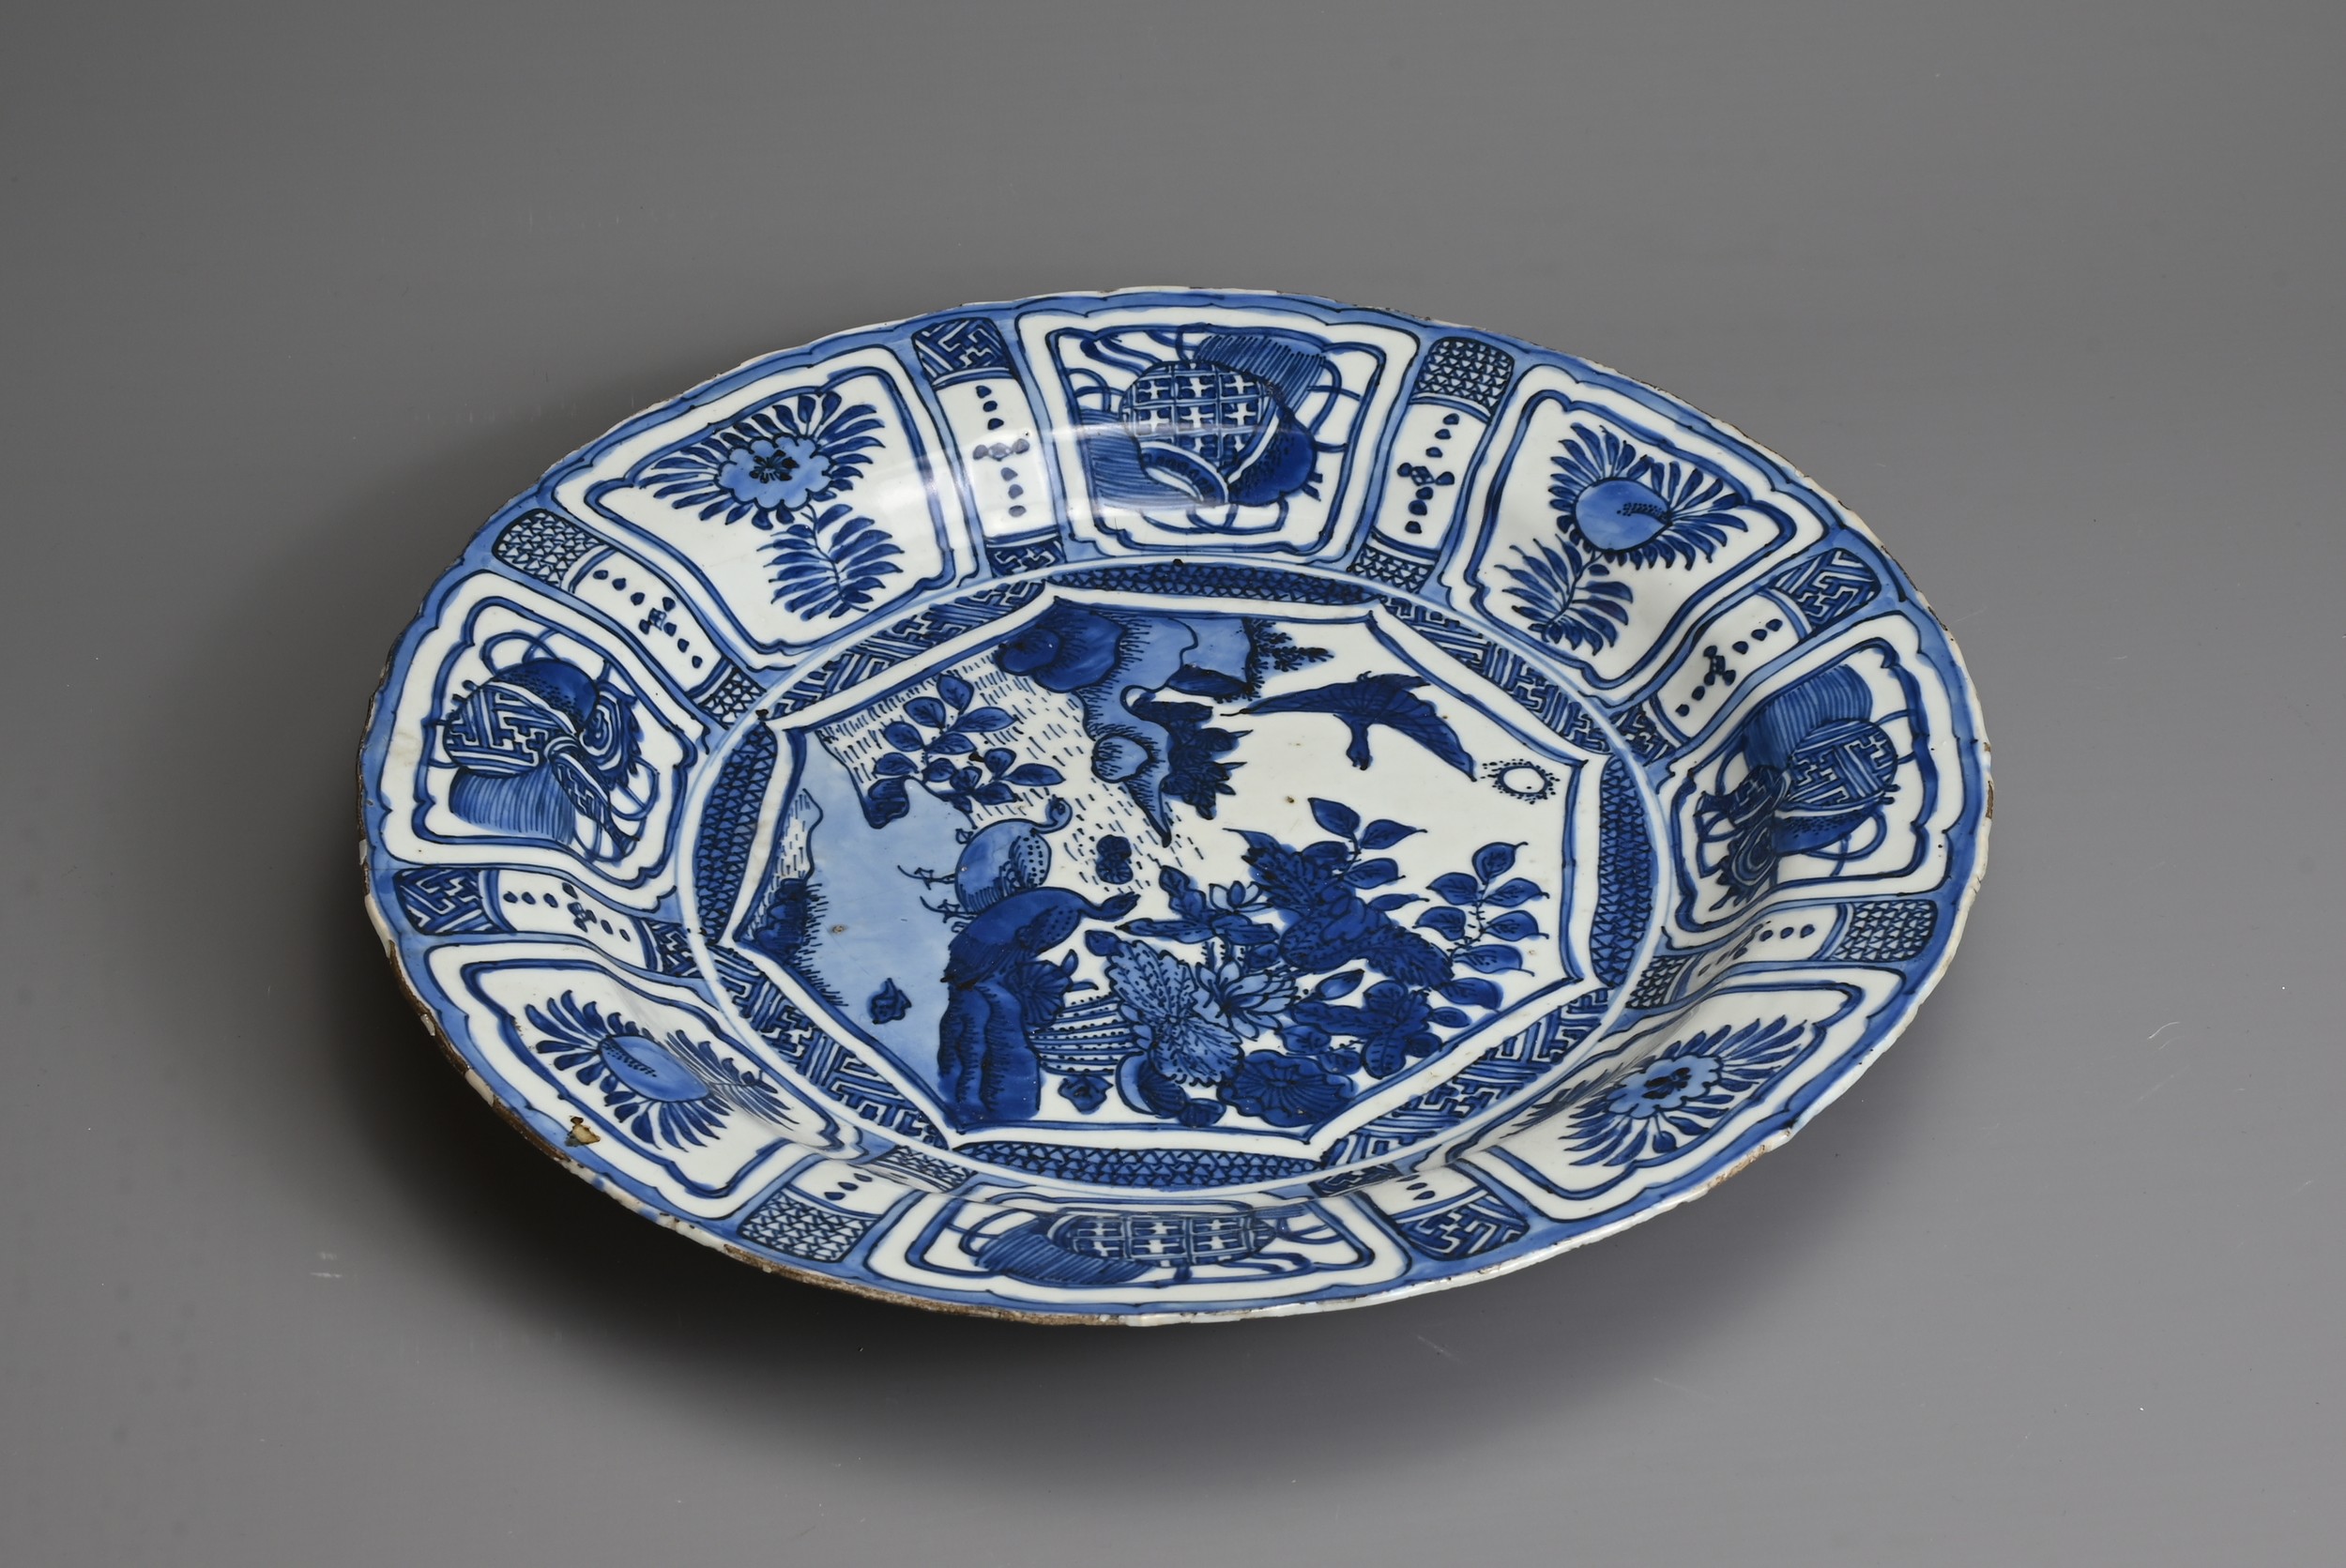 A CHINESE BLUE AND WHITE PORCELAIN KRAAK DISH, MING DYNASTY. Decorated with ducks at a lotus pond - Image 6 of 6